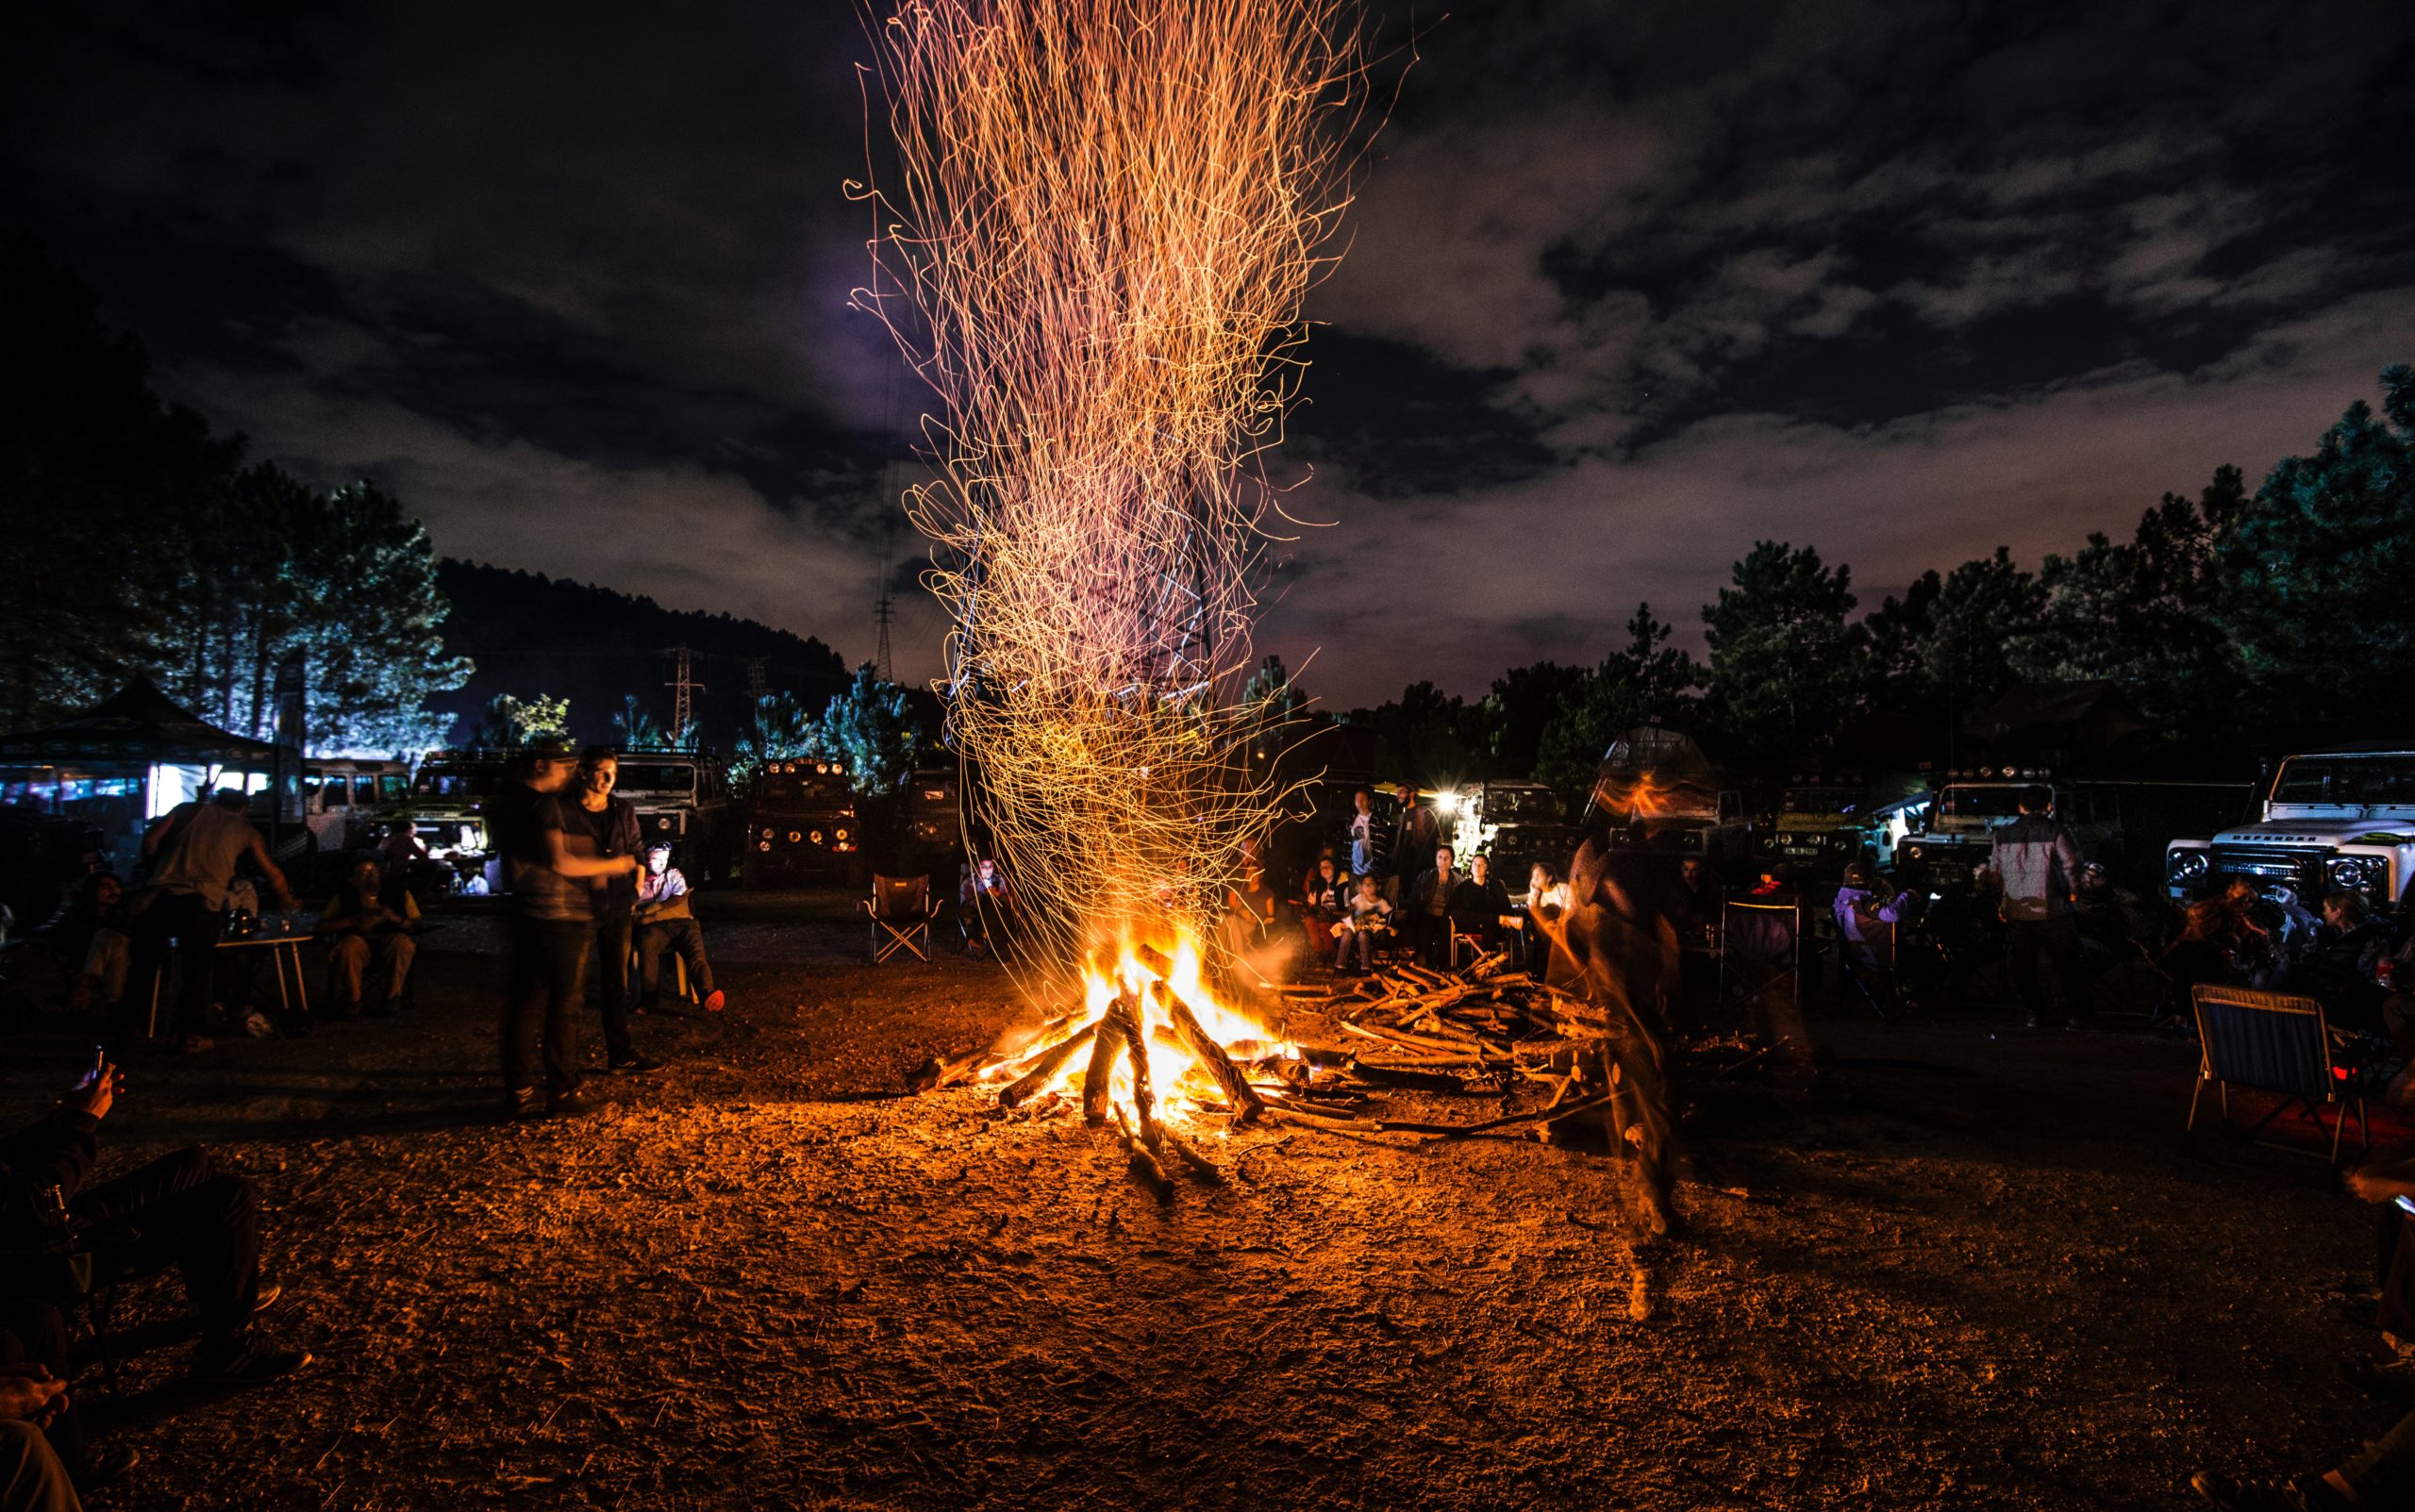 People stand around a bonfire at night with a flock of jeeps parked in the background.